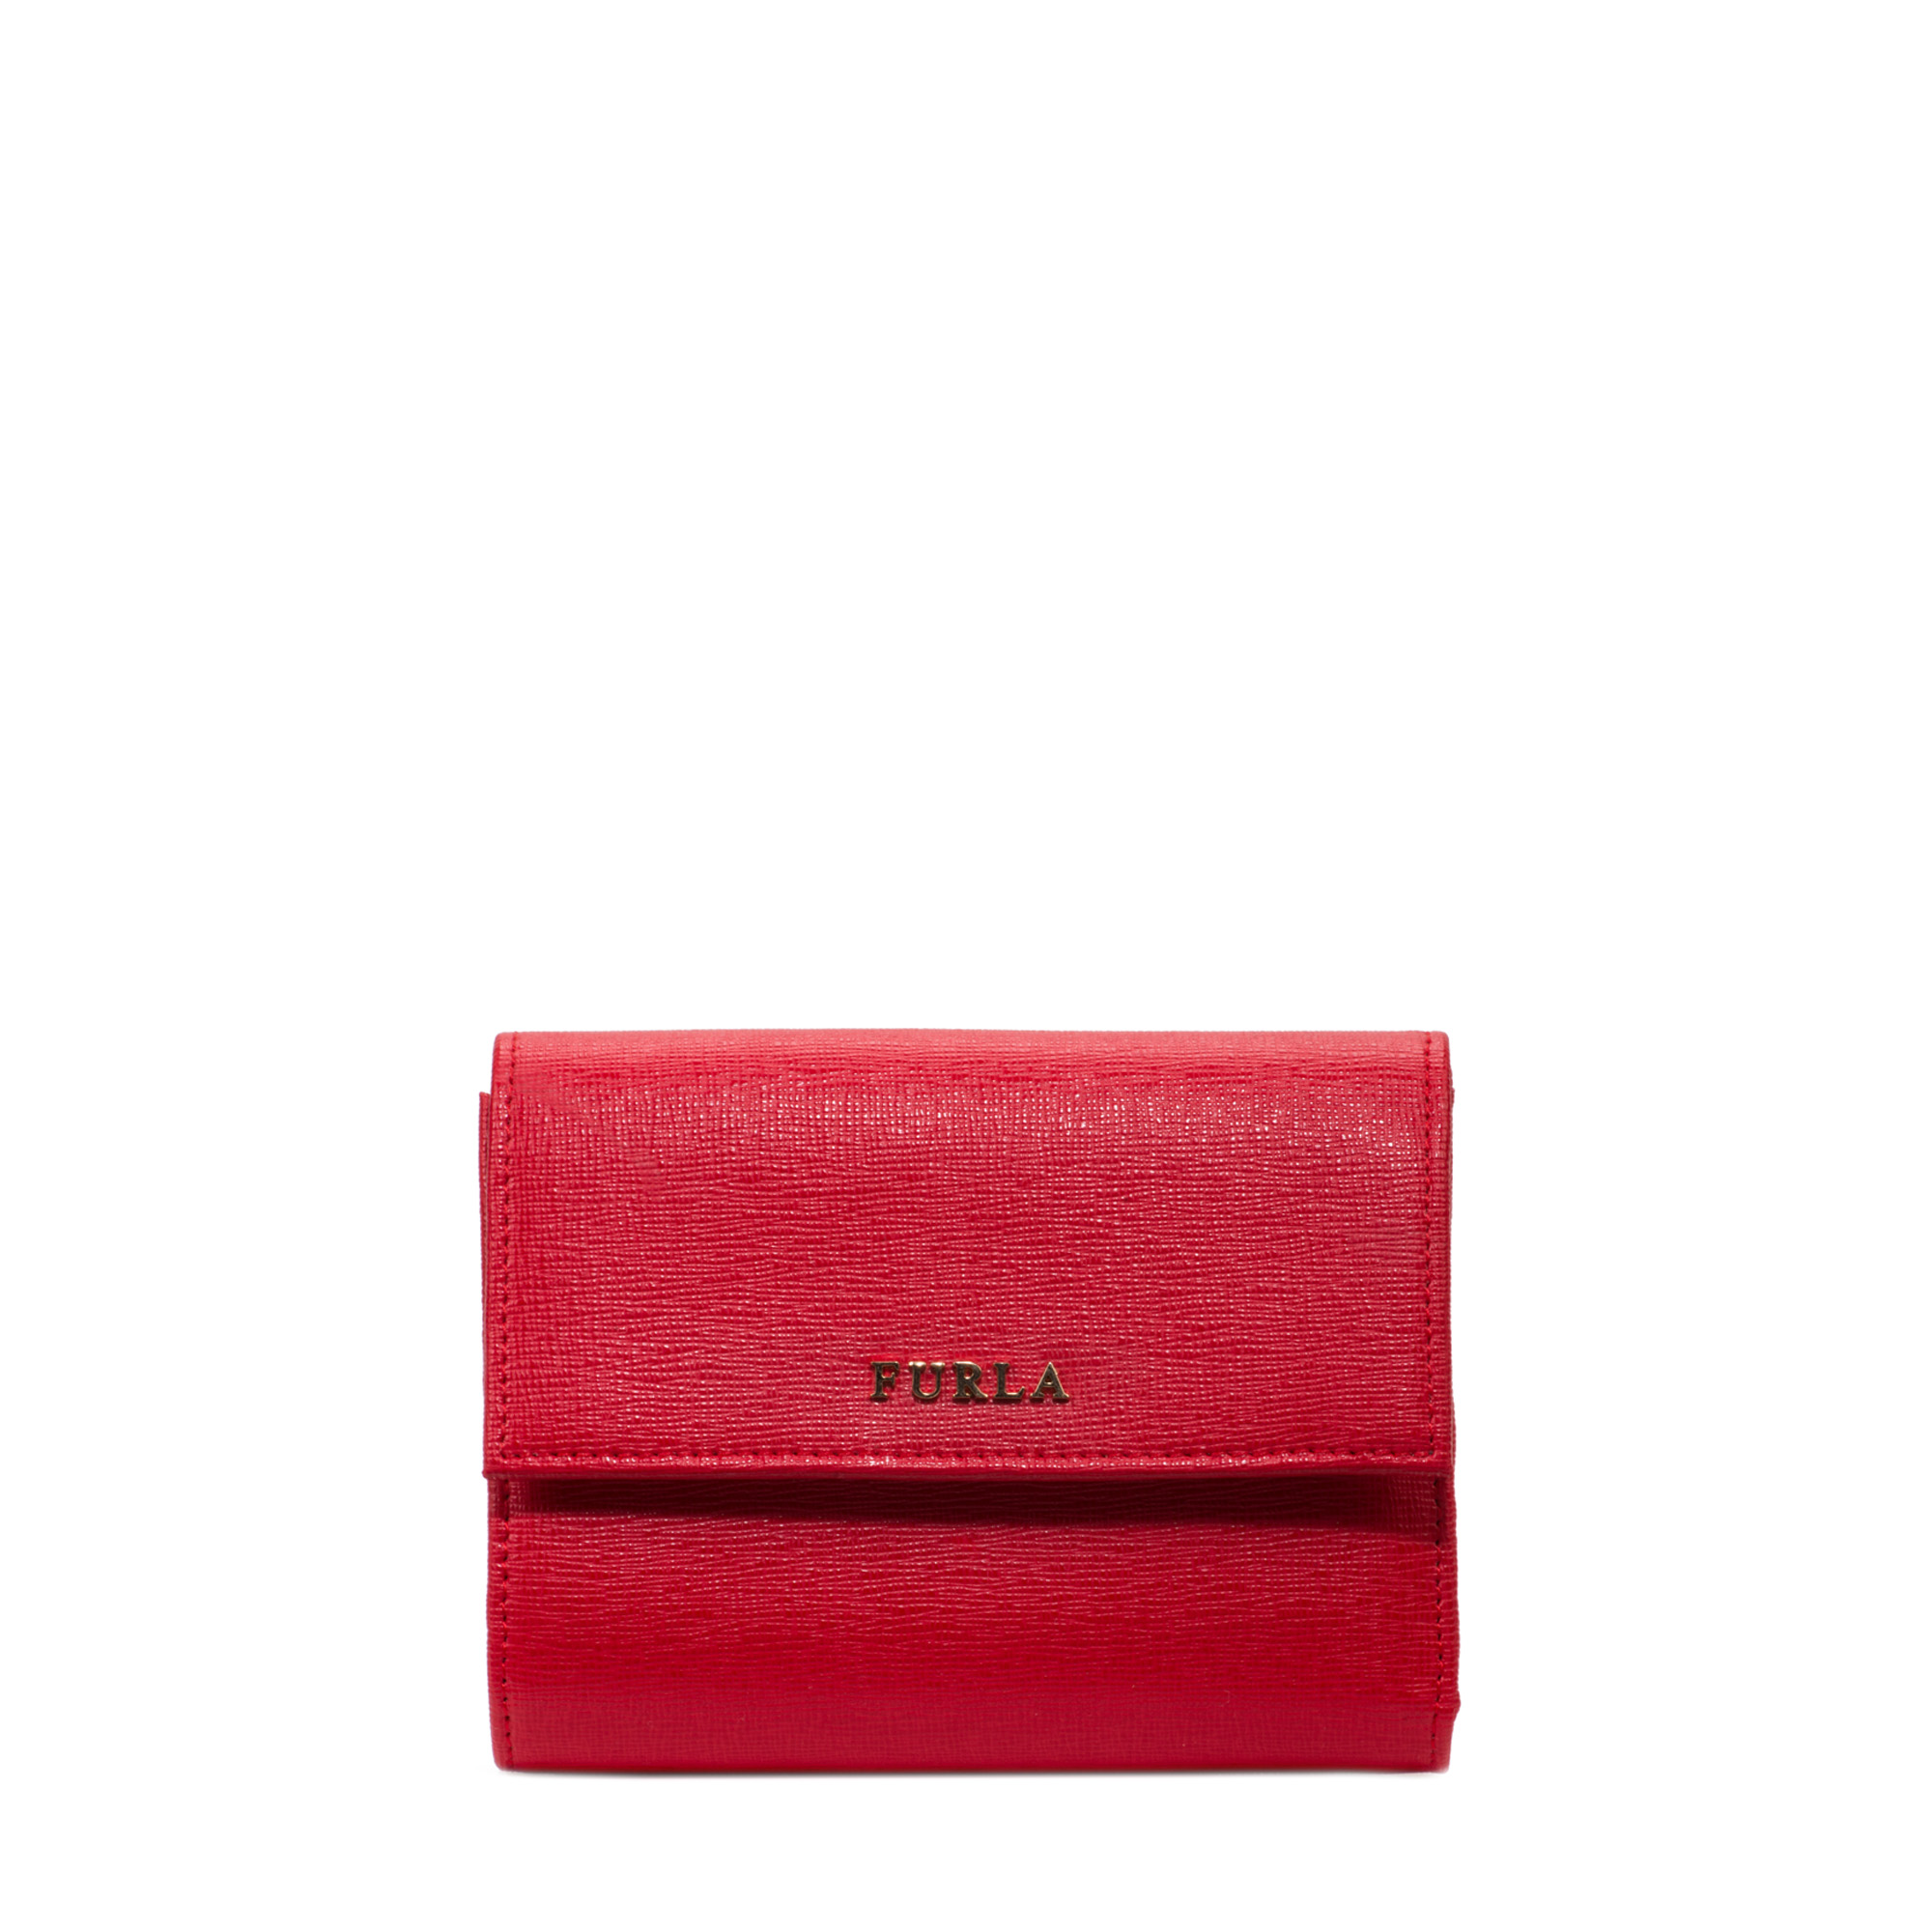 Furla Classic Wallet in Red (cherry) | Lyst